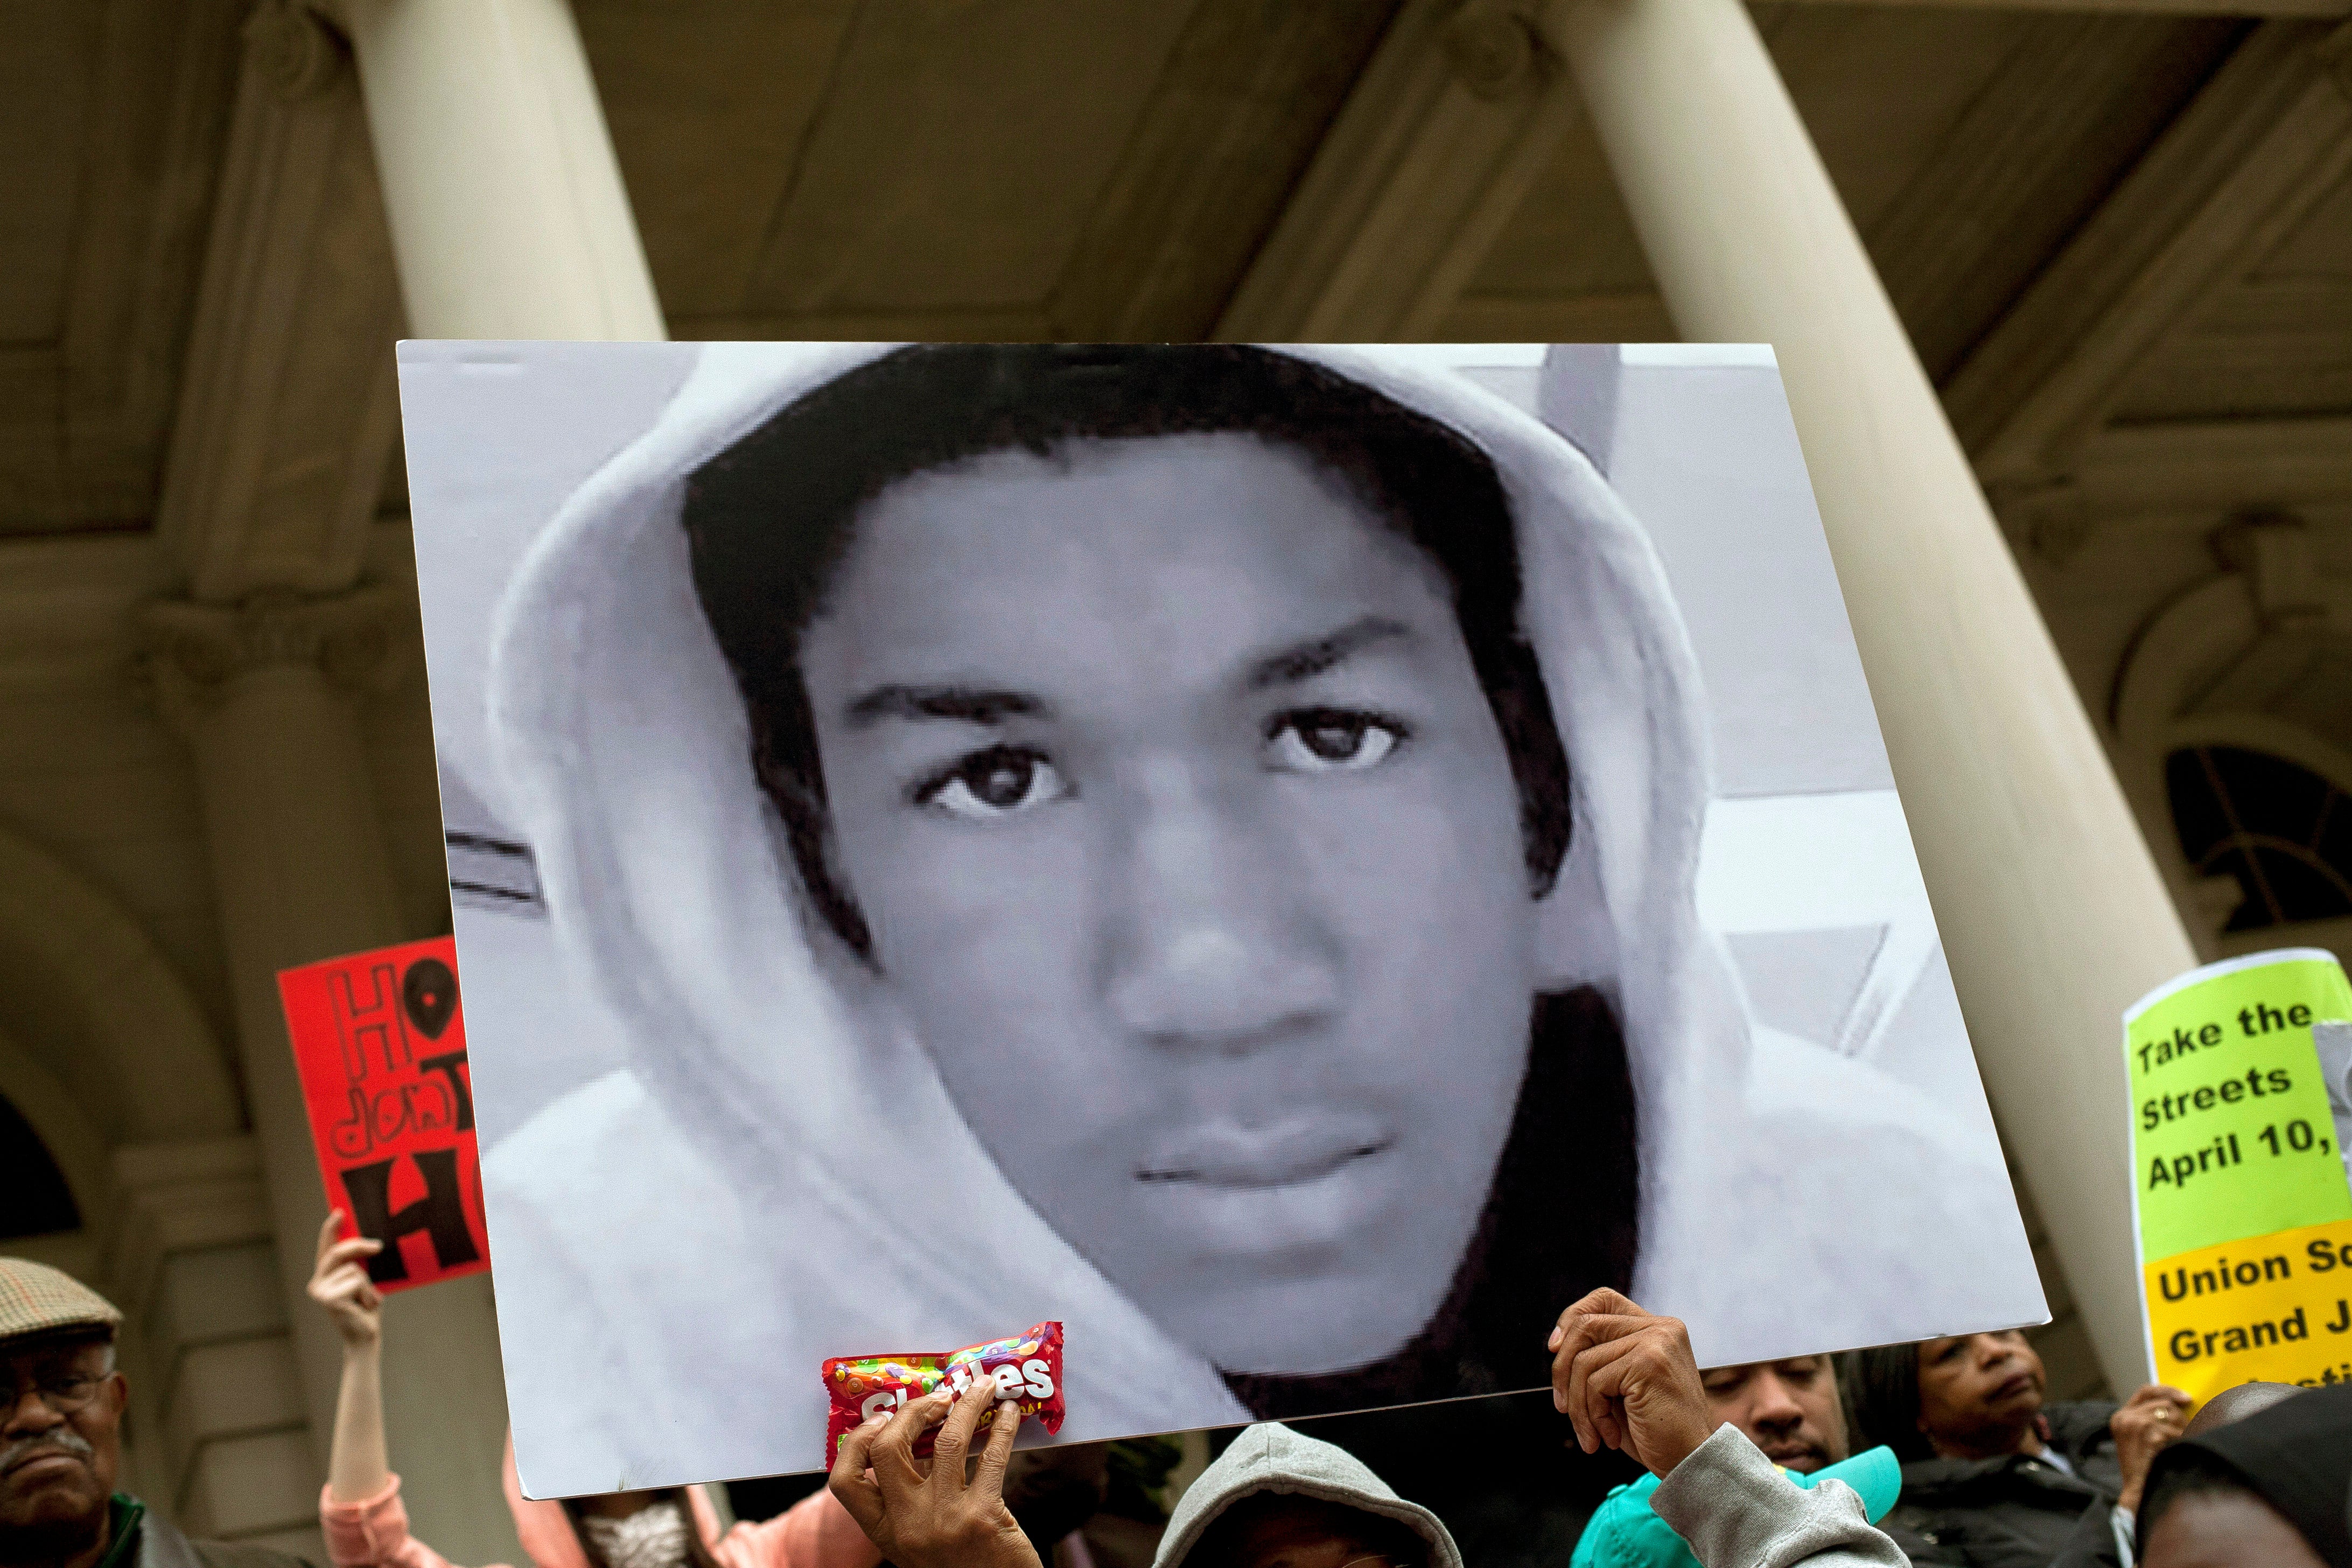 Trayvon Martin was shot dead in 2012 with his killer acquitted under the stand your ground law